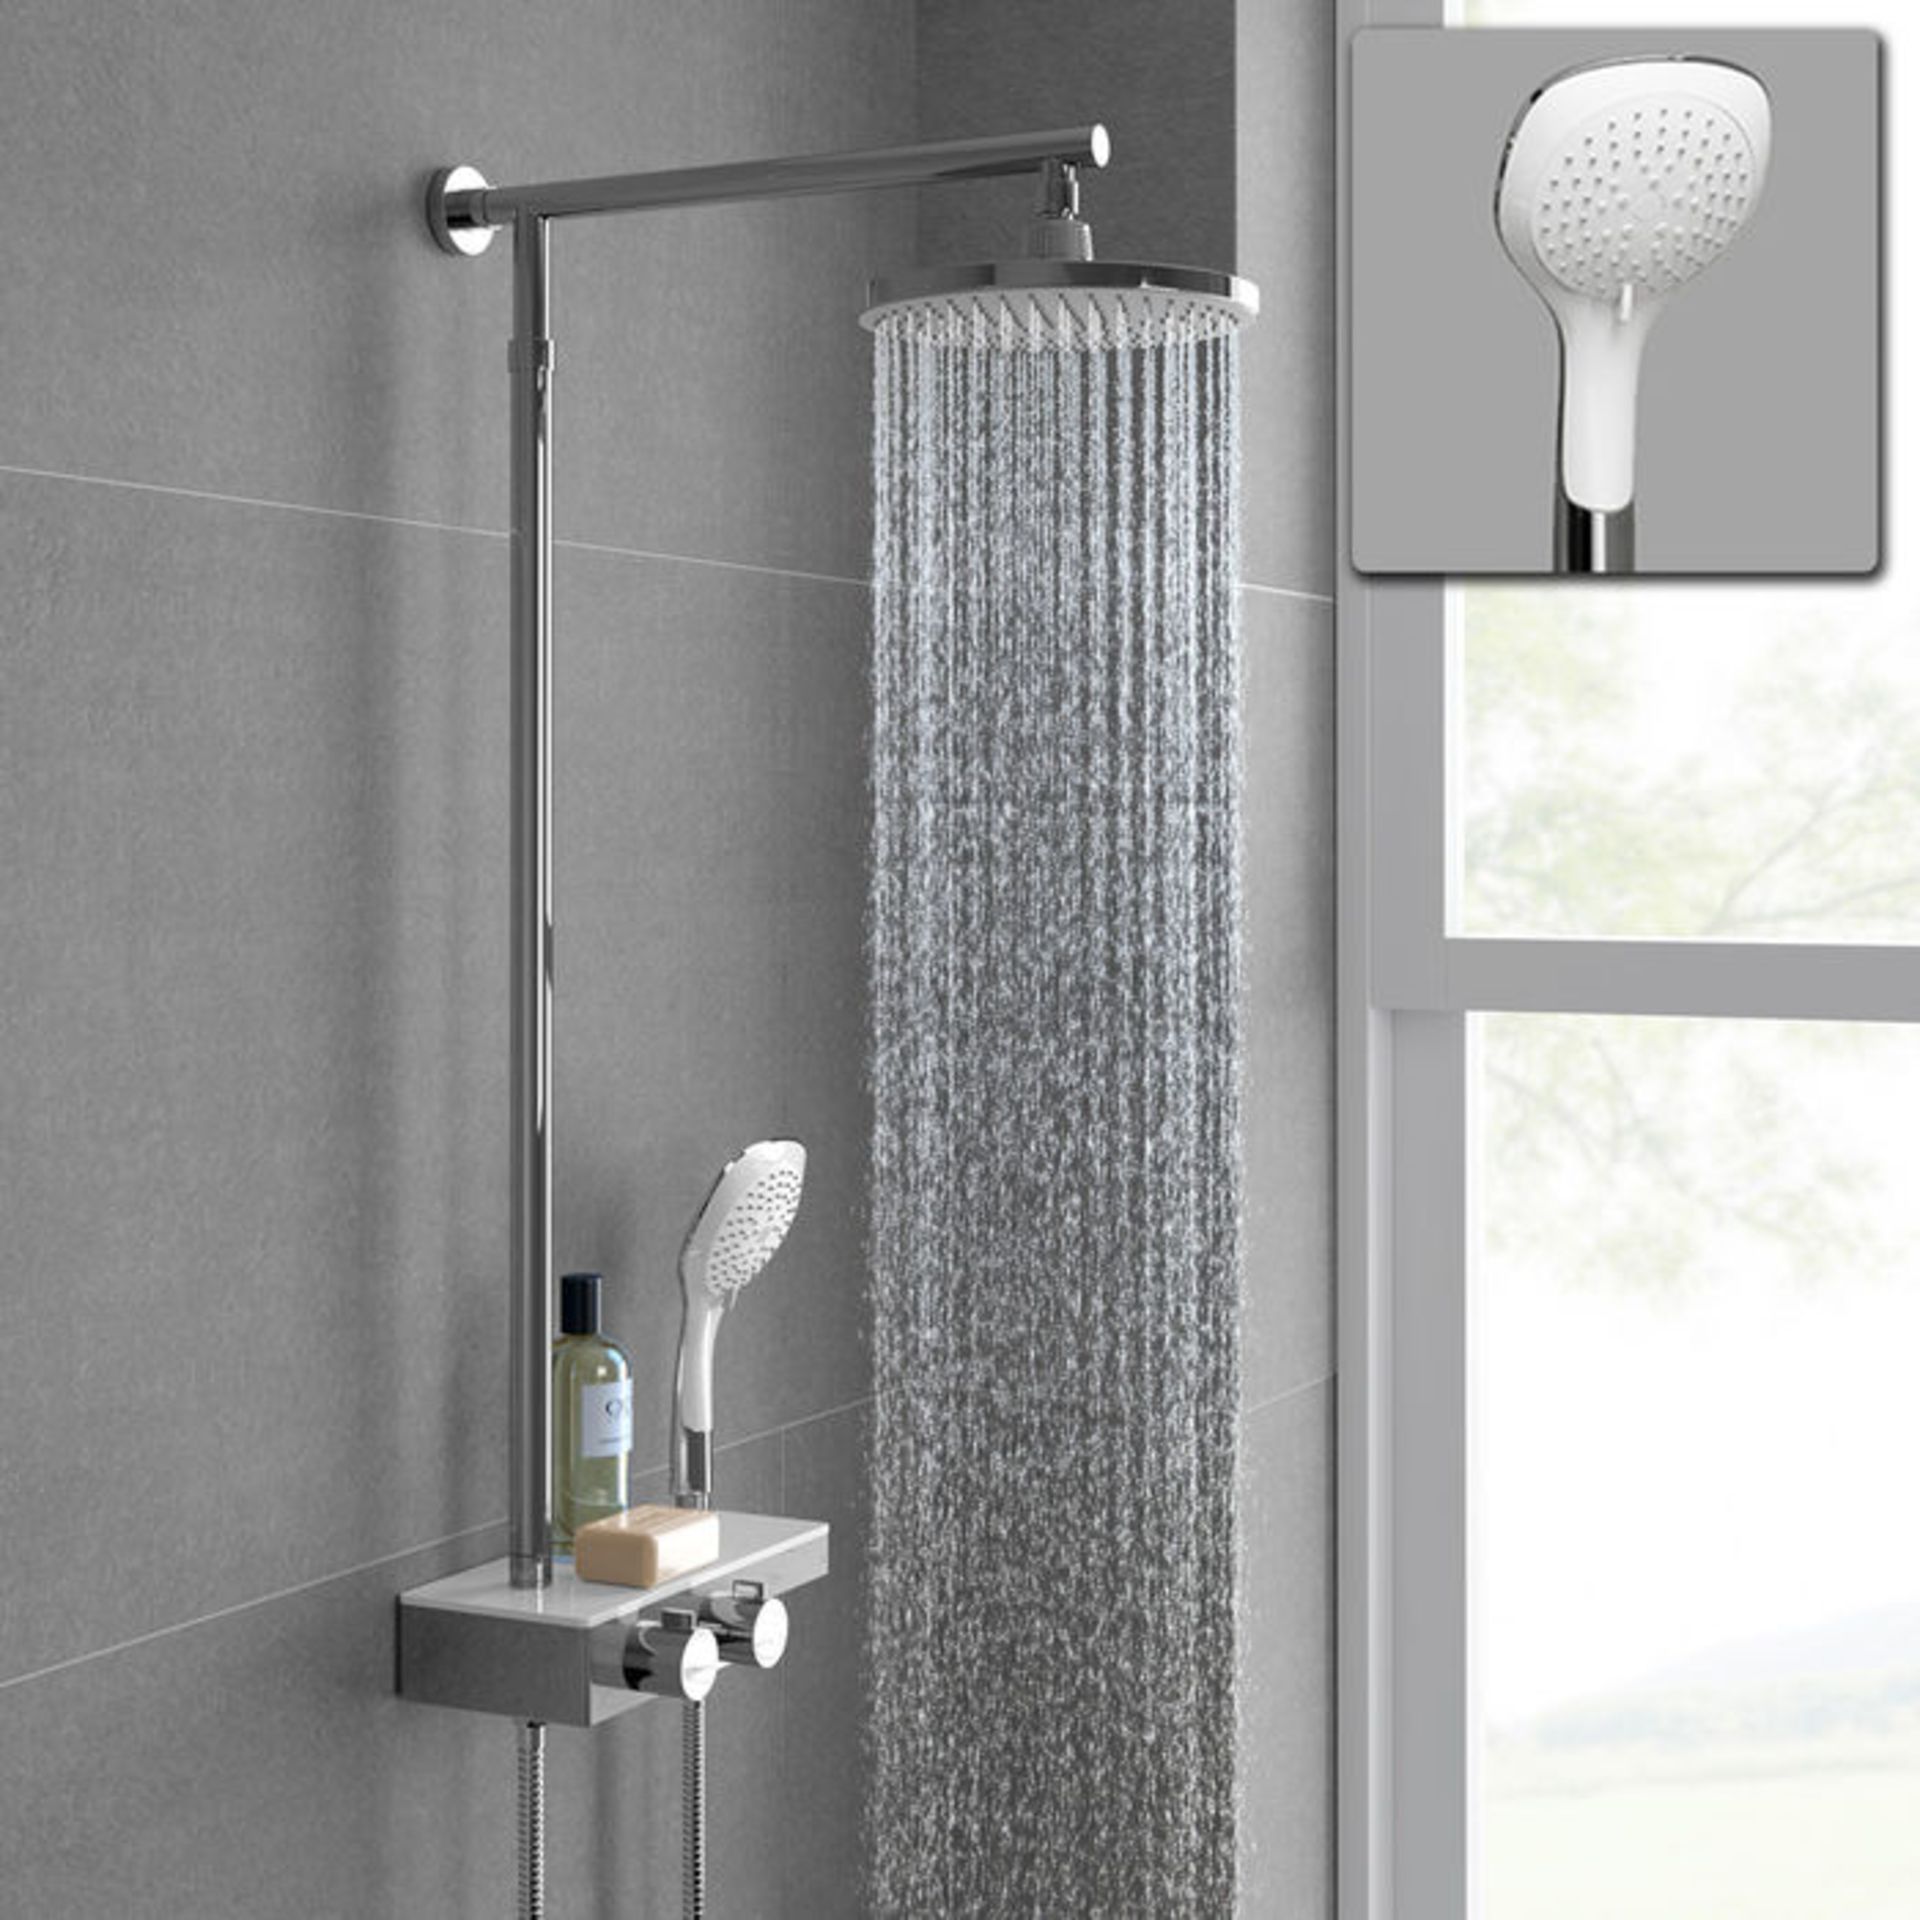 (LU123) Round Exposed Thermostatic Mixer Shower Kit Medium Head & Shelf. Cool to touch shower for - Image 4 of 5